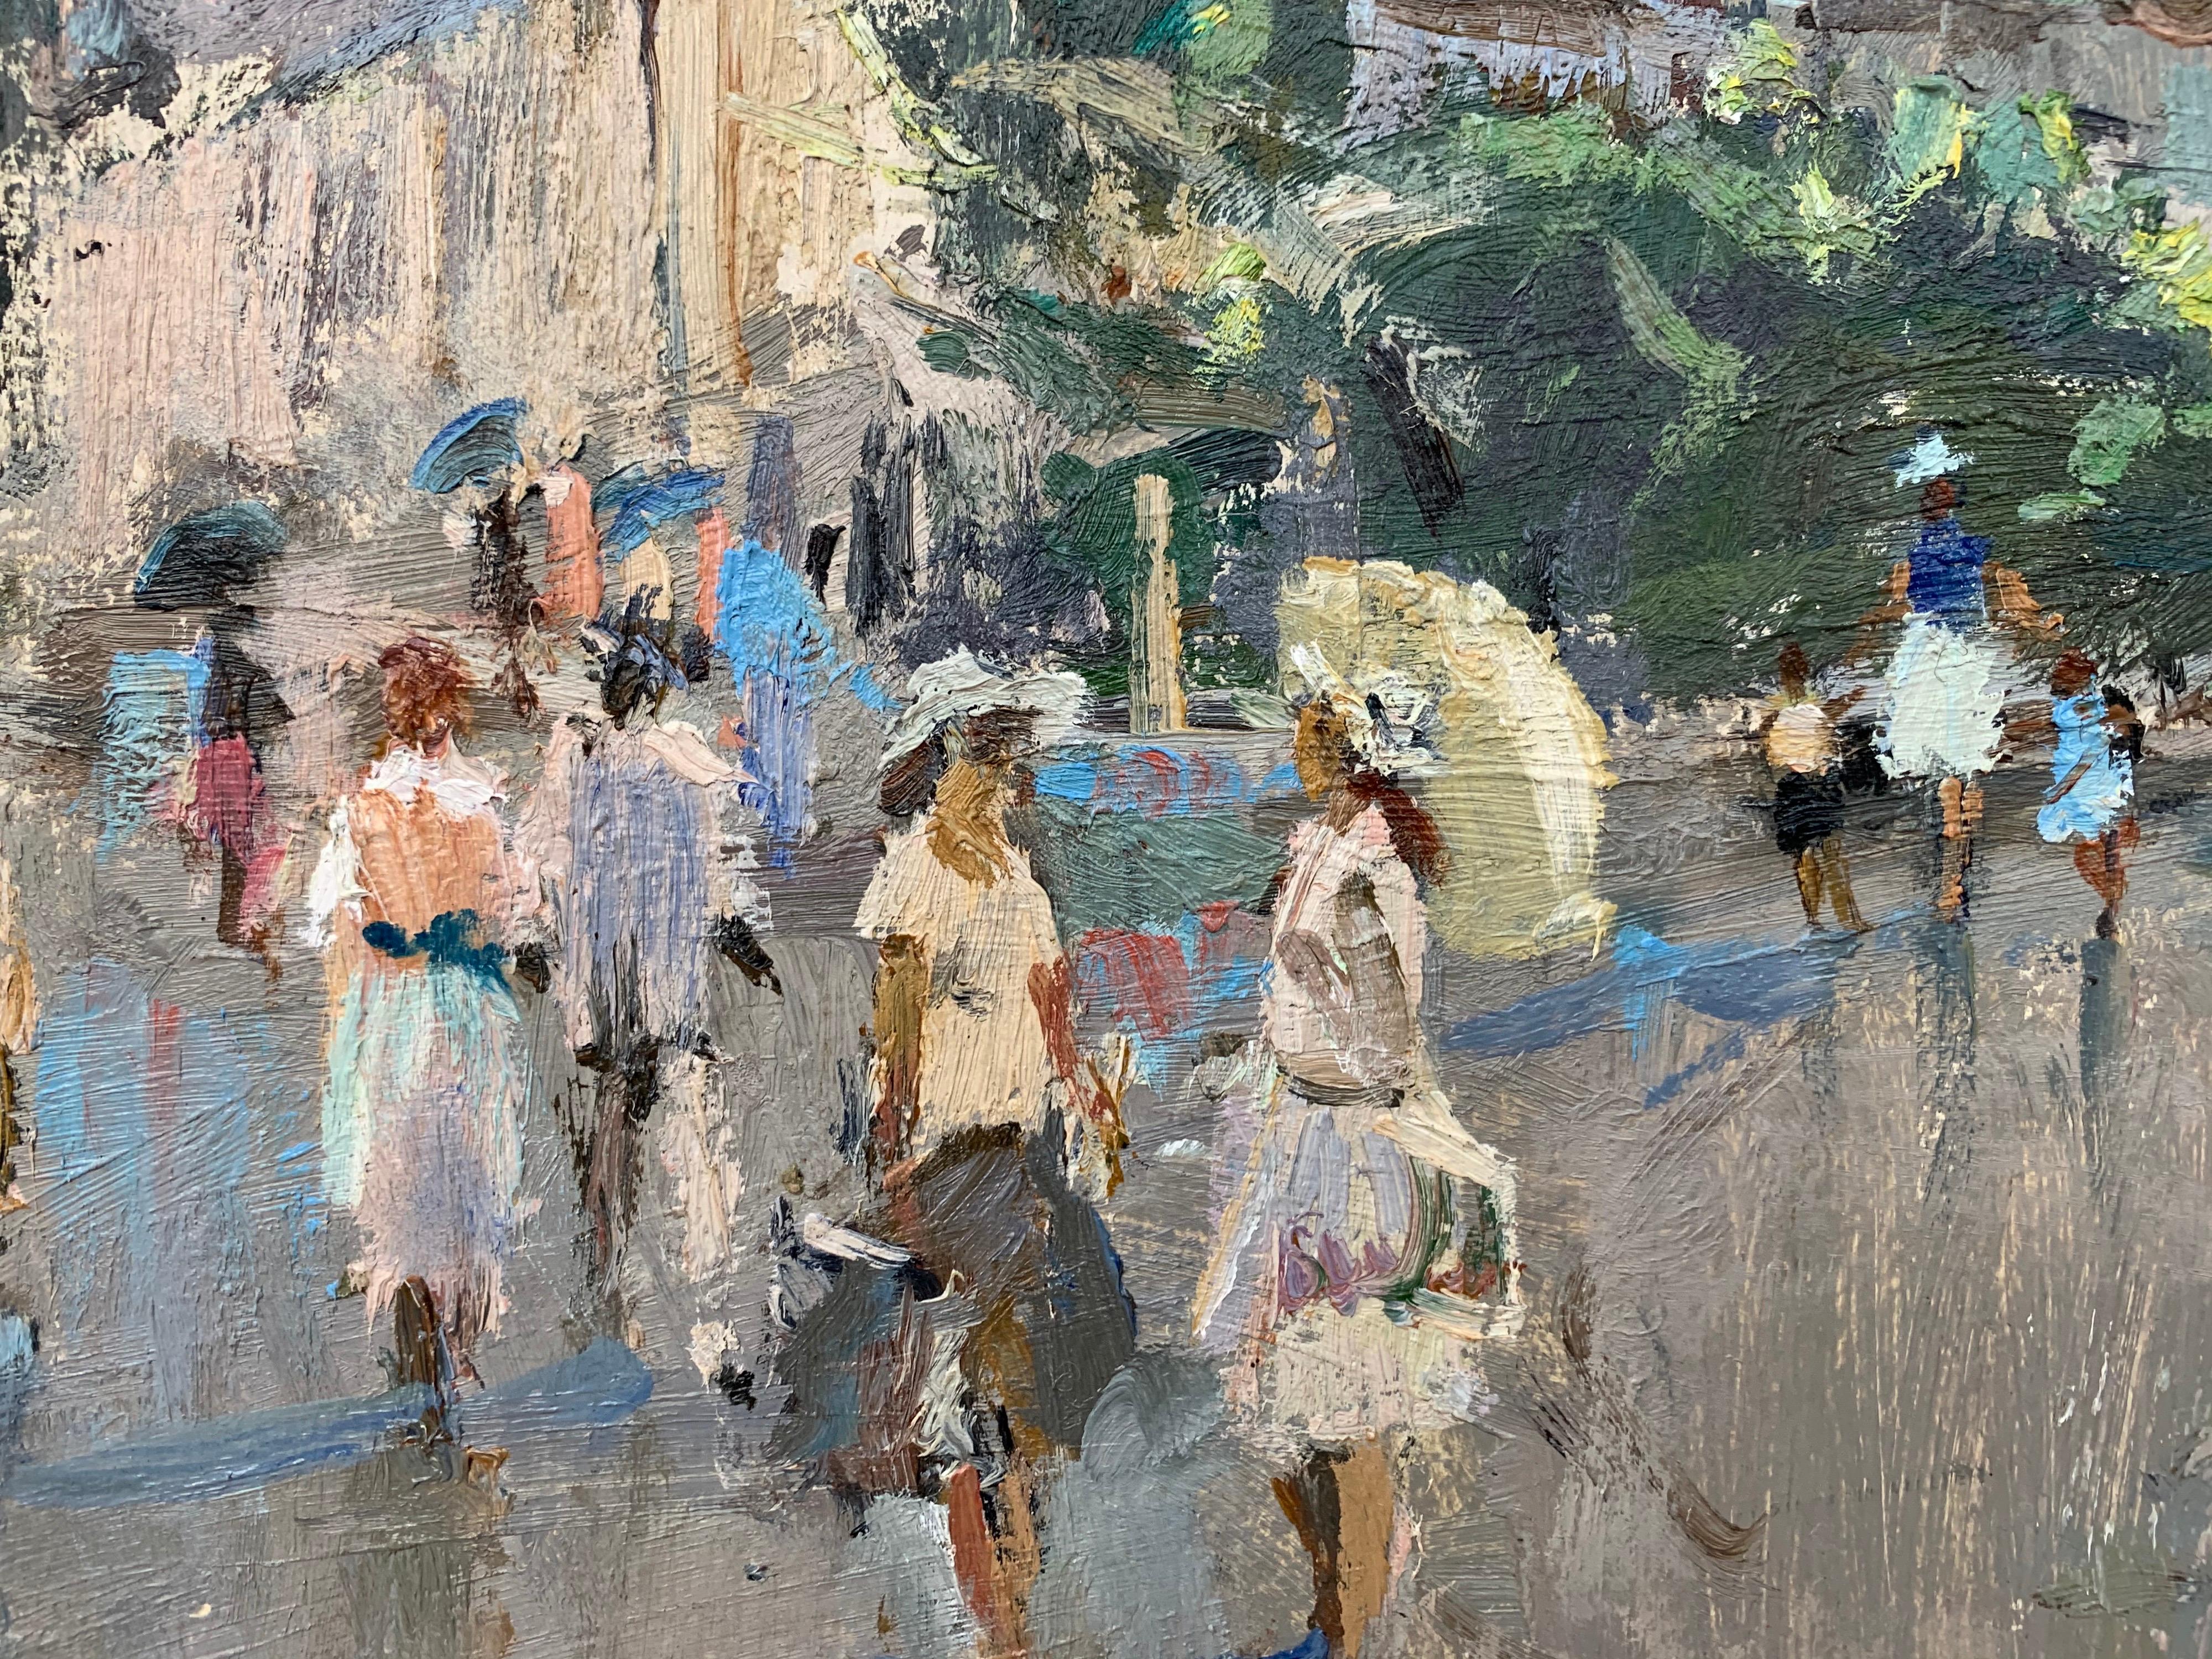 Impressionistic Street Scene with Figures in Aloupak Crimea by Russian Artist. Anatoliy Lukash was born in 1956 and is based in Saint-Petersburg, Russia. He is a well-established painter with works held in collections all over the world. Slightly